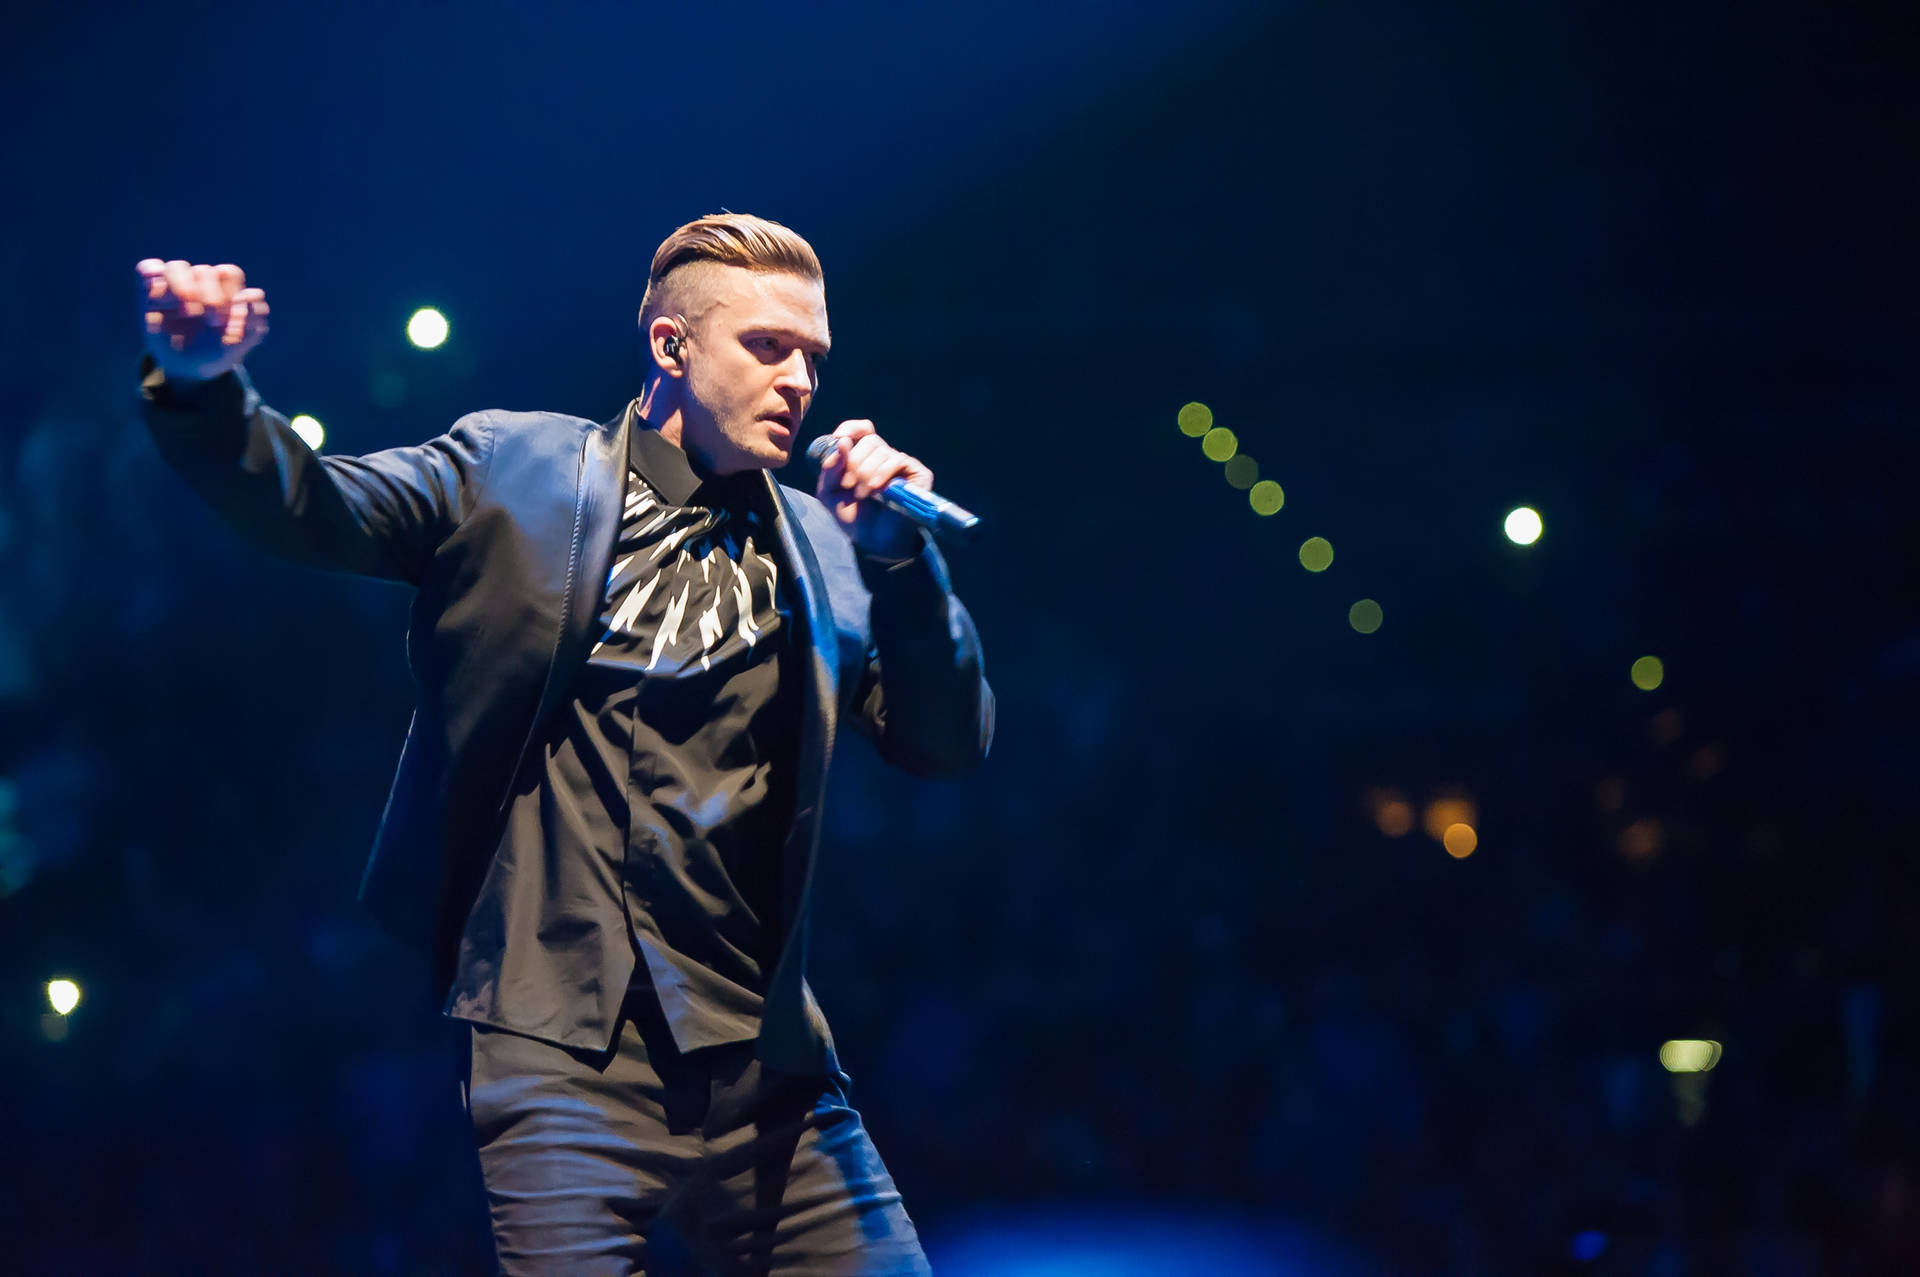 Justintimberlake Sjunger I Mörk Arena. (note: This Sentence Doesn't Specifically Reference Computer Or Mobile Wallpaper. If The Intention Is To Describe A Wallpaper Featuring Justin Timberlake Singing In A Dark Arena, You Could Say 